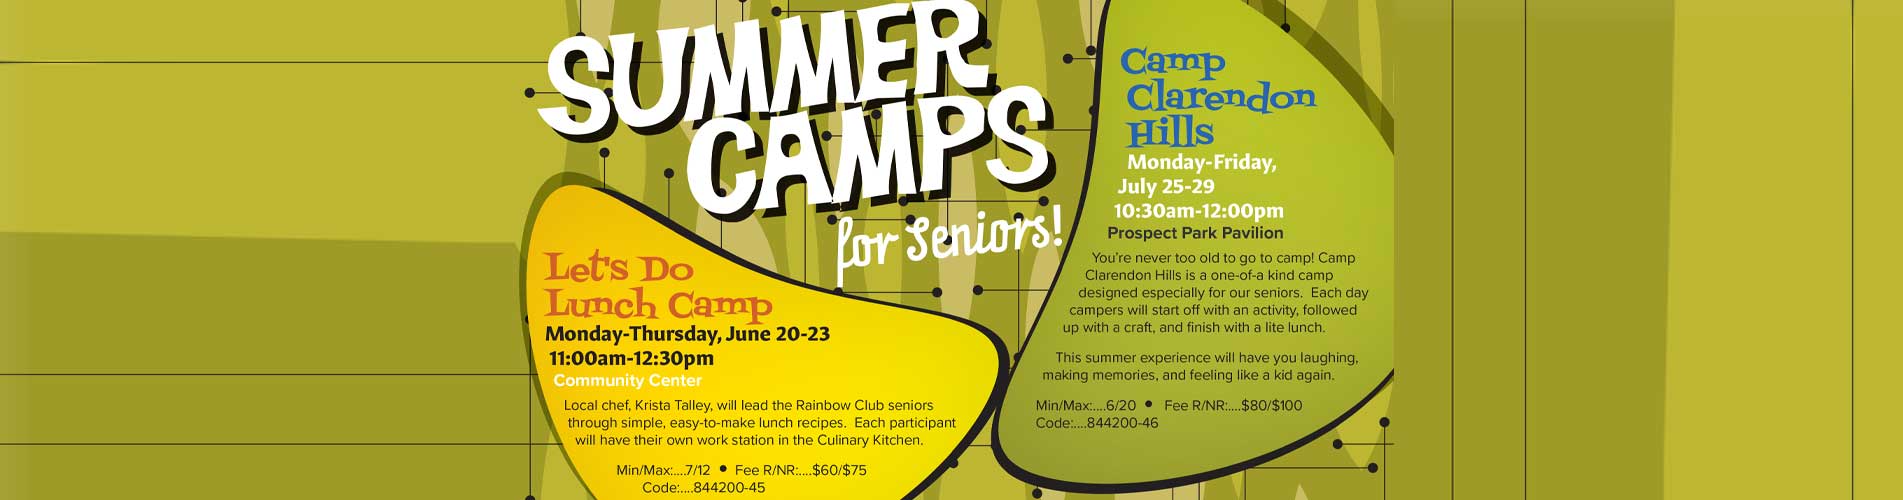 Summer Camps for Seniors